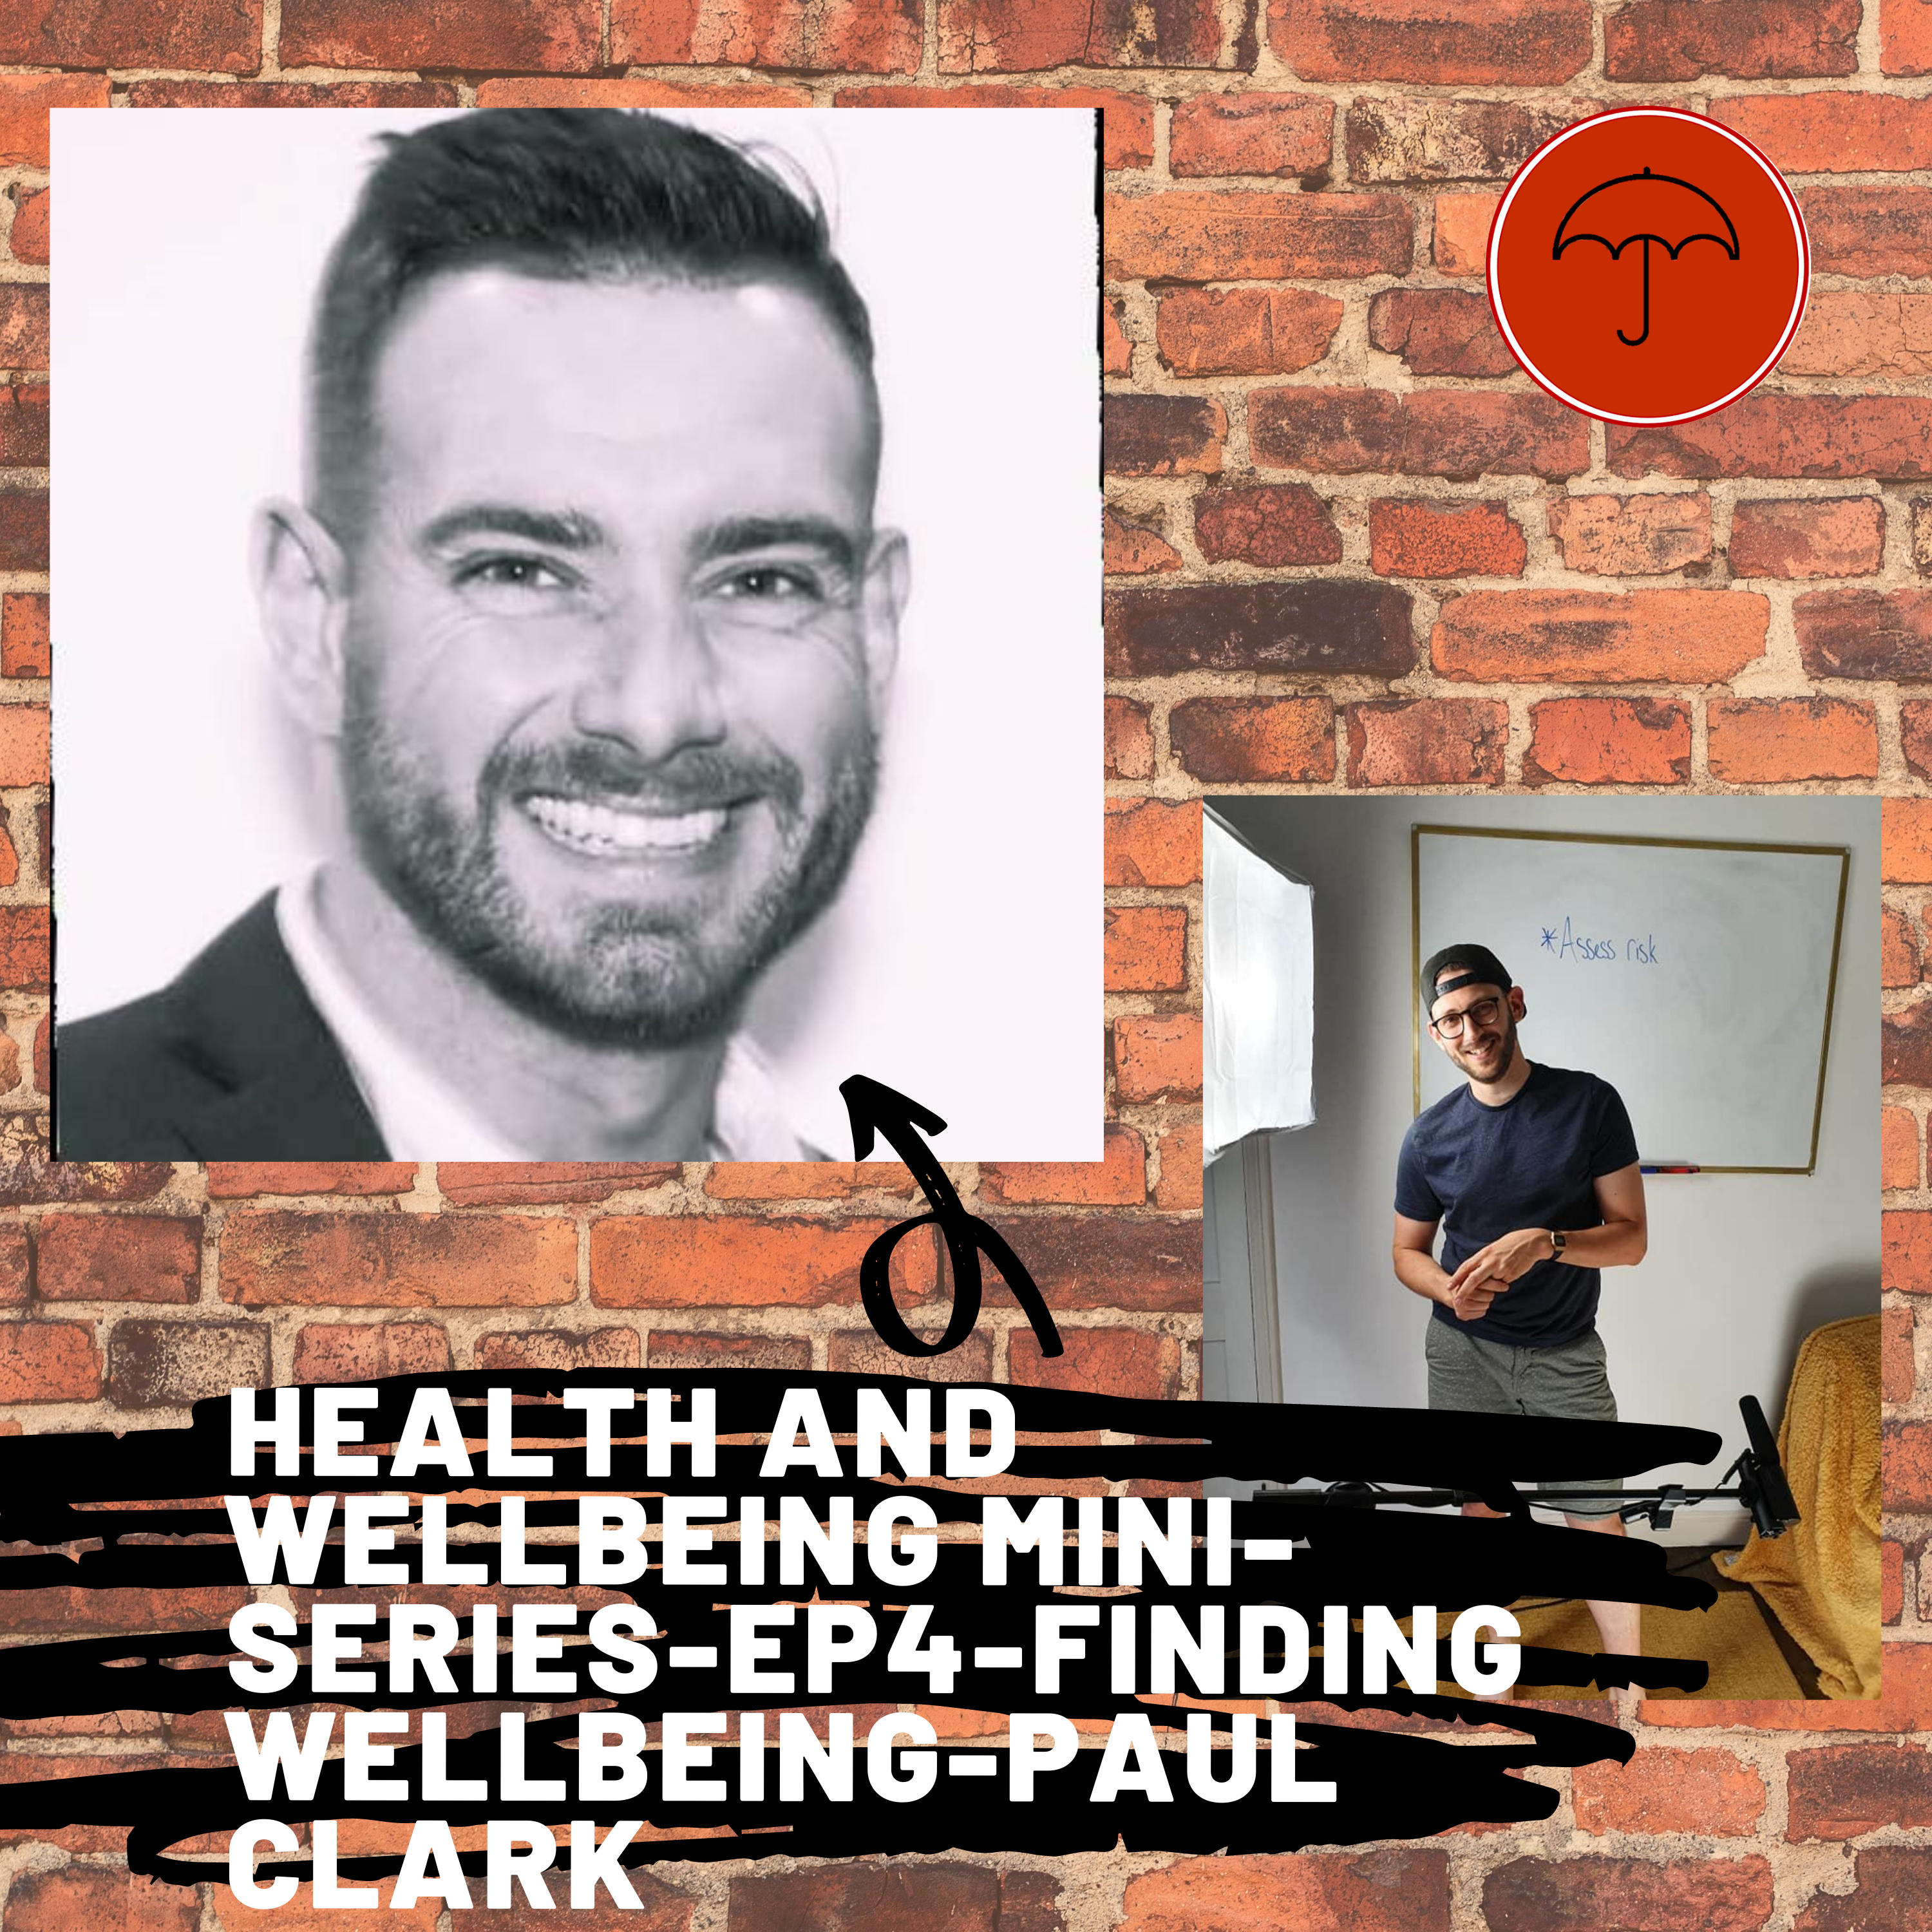 Finding Wellbeing-With Paul Clark-Health and Wellbeing miniseries part 4 EP76